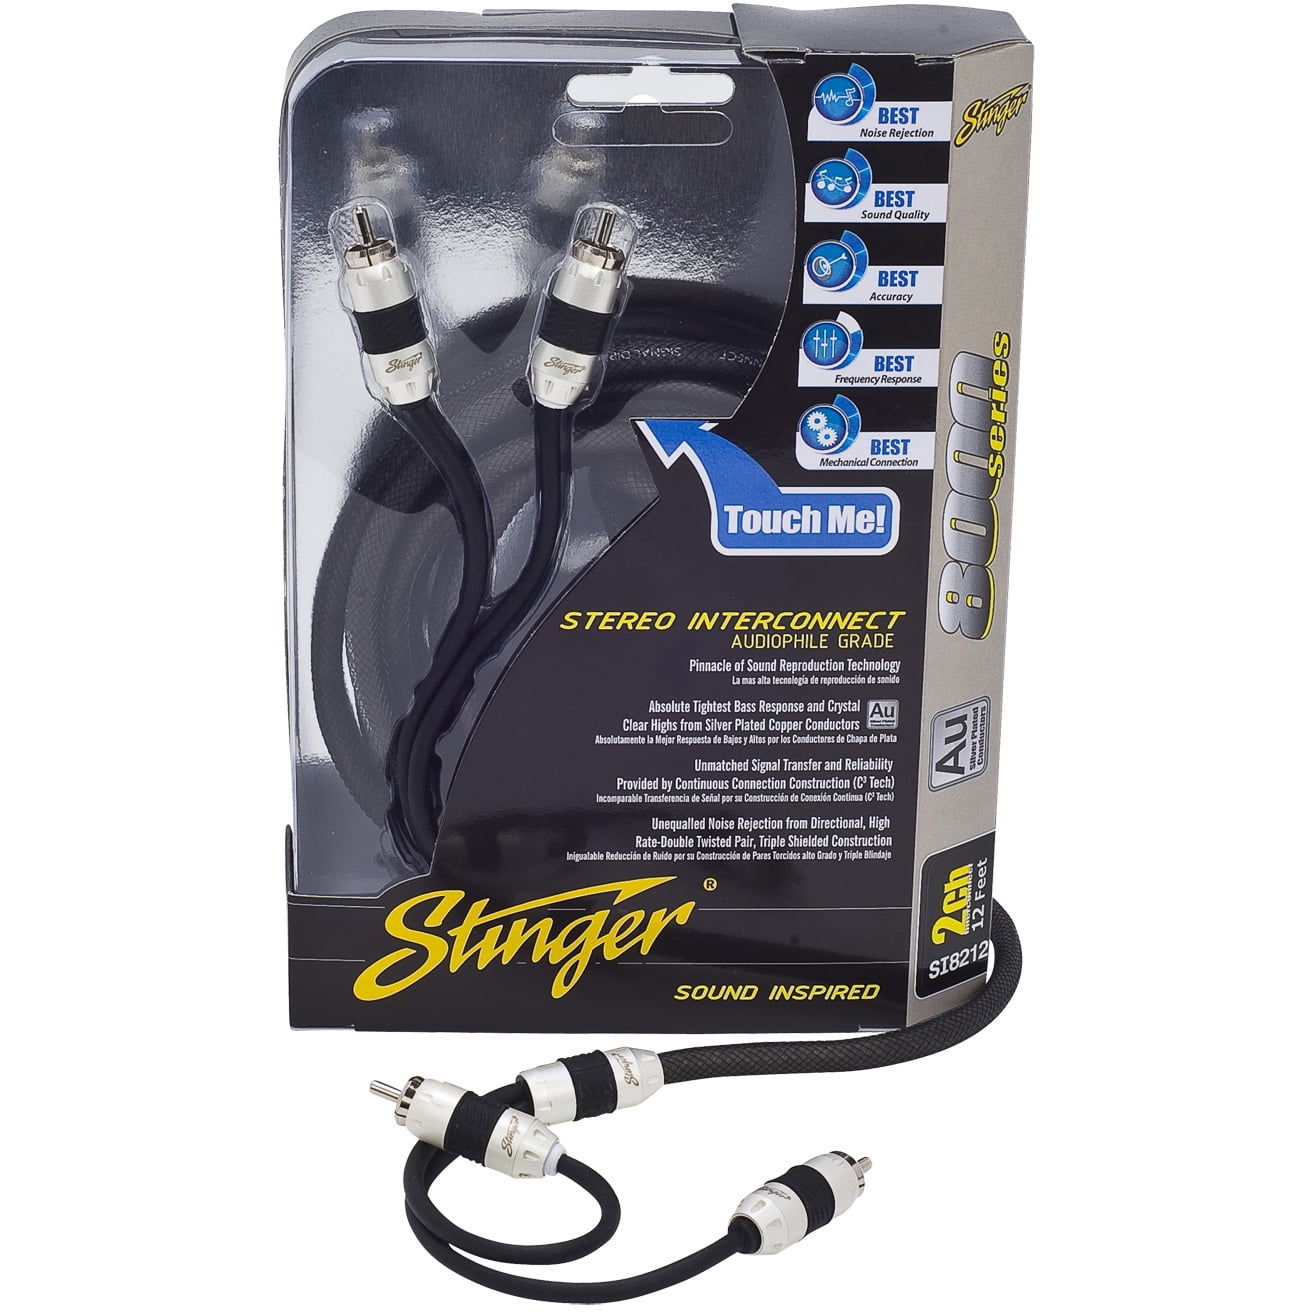 NEW 15 FT STINGER SHIELDED CAR STEREO 2 CHANNEL RCA INTERCONNE​CT AUDIO CABLE 